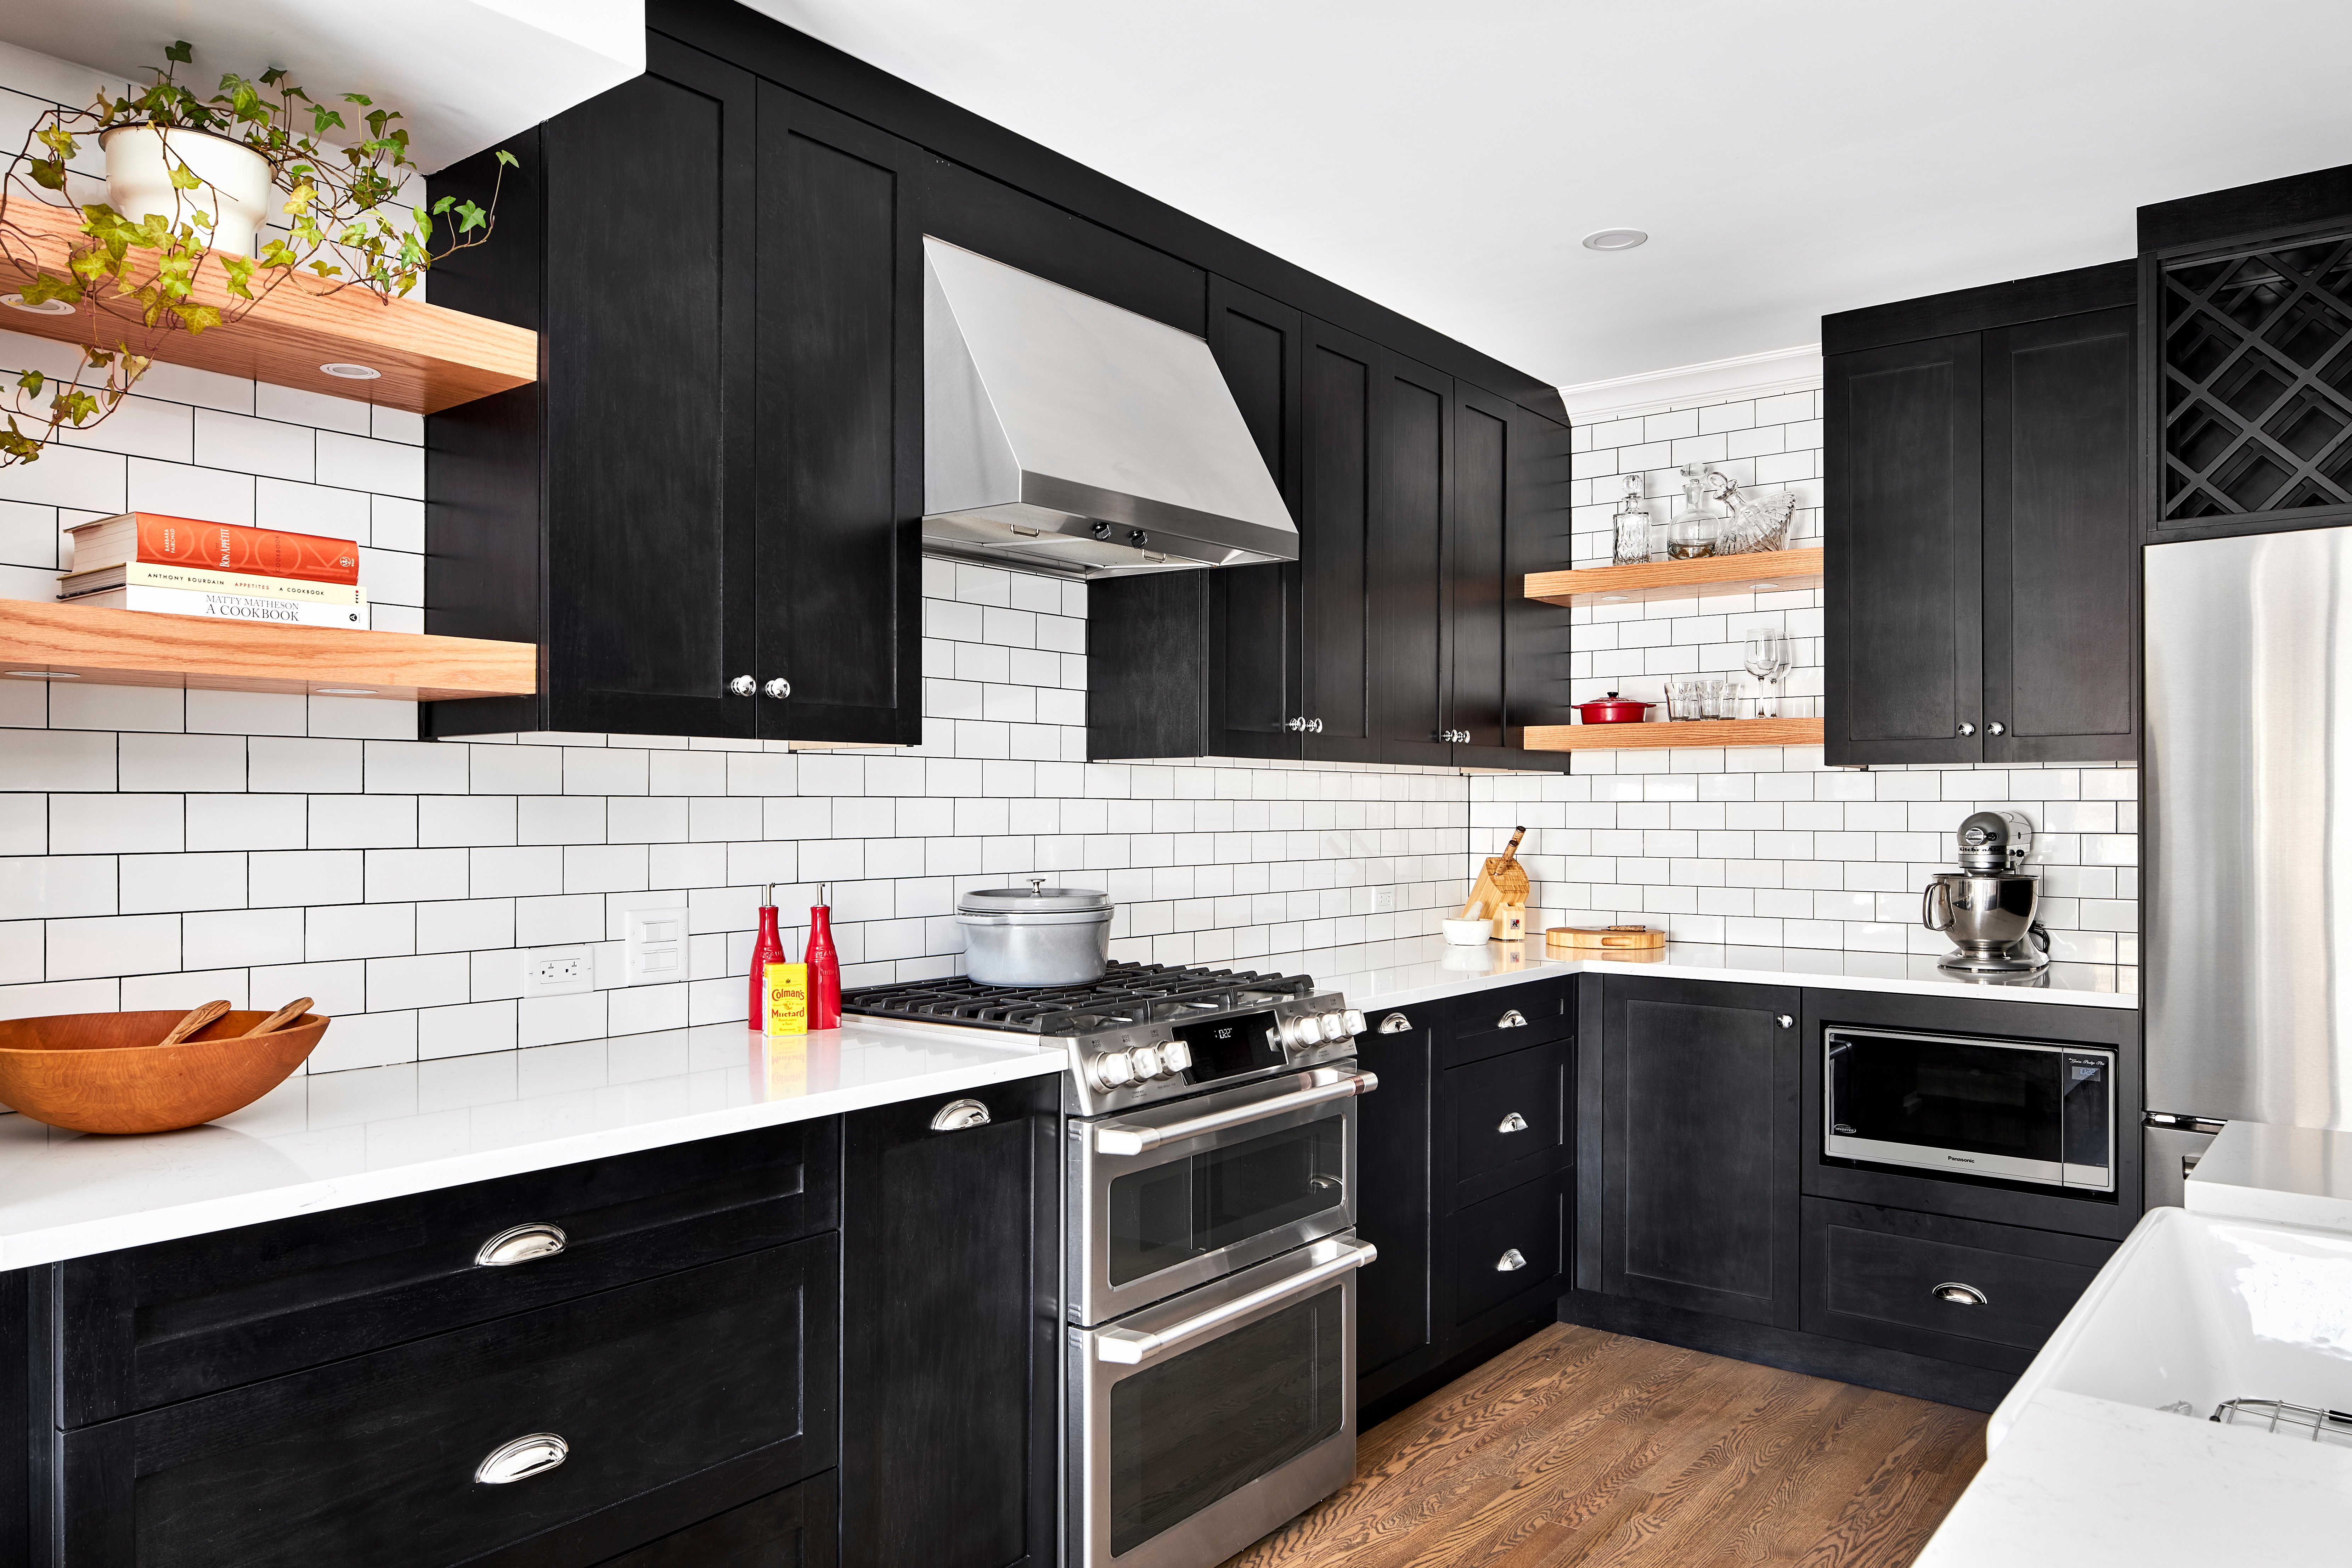 A Deslaurier kitchen with Ebony-stained cabinets.